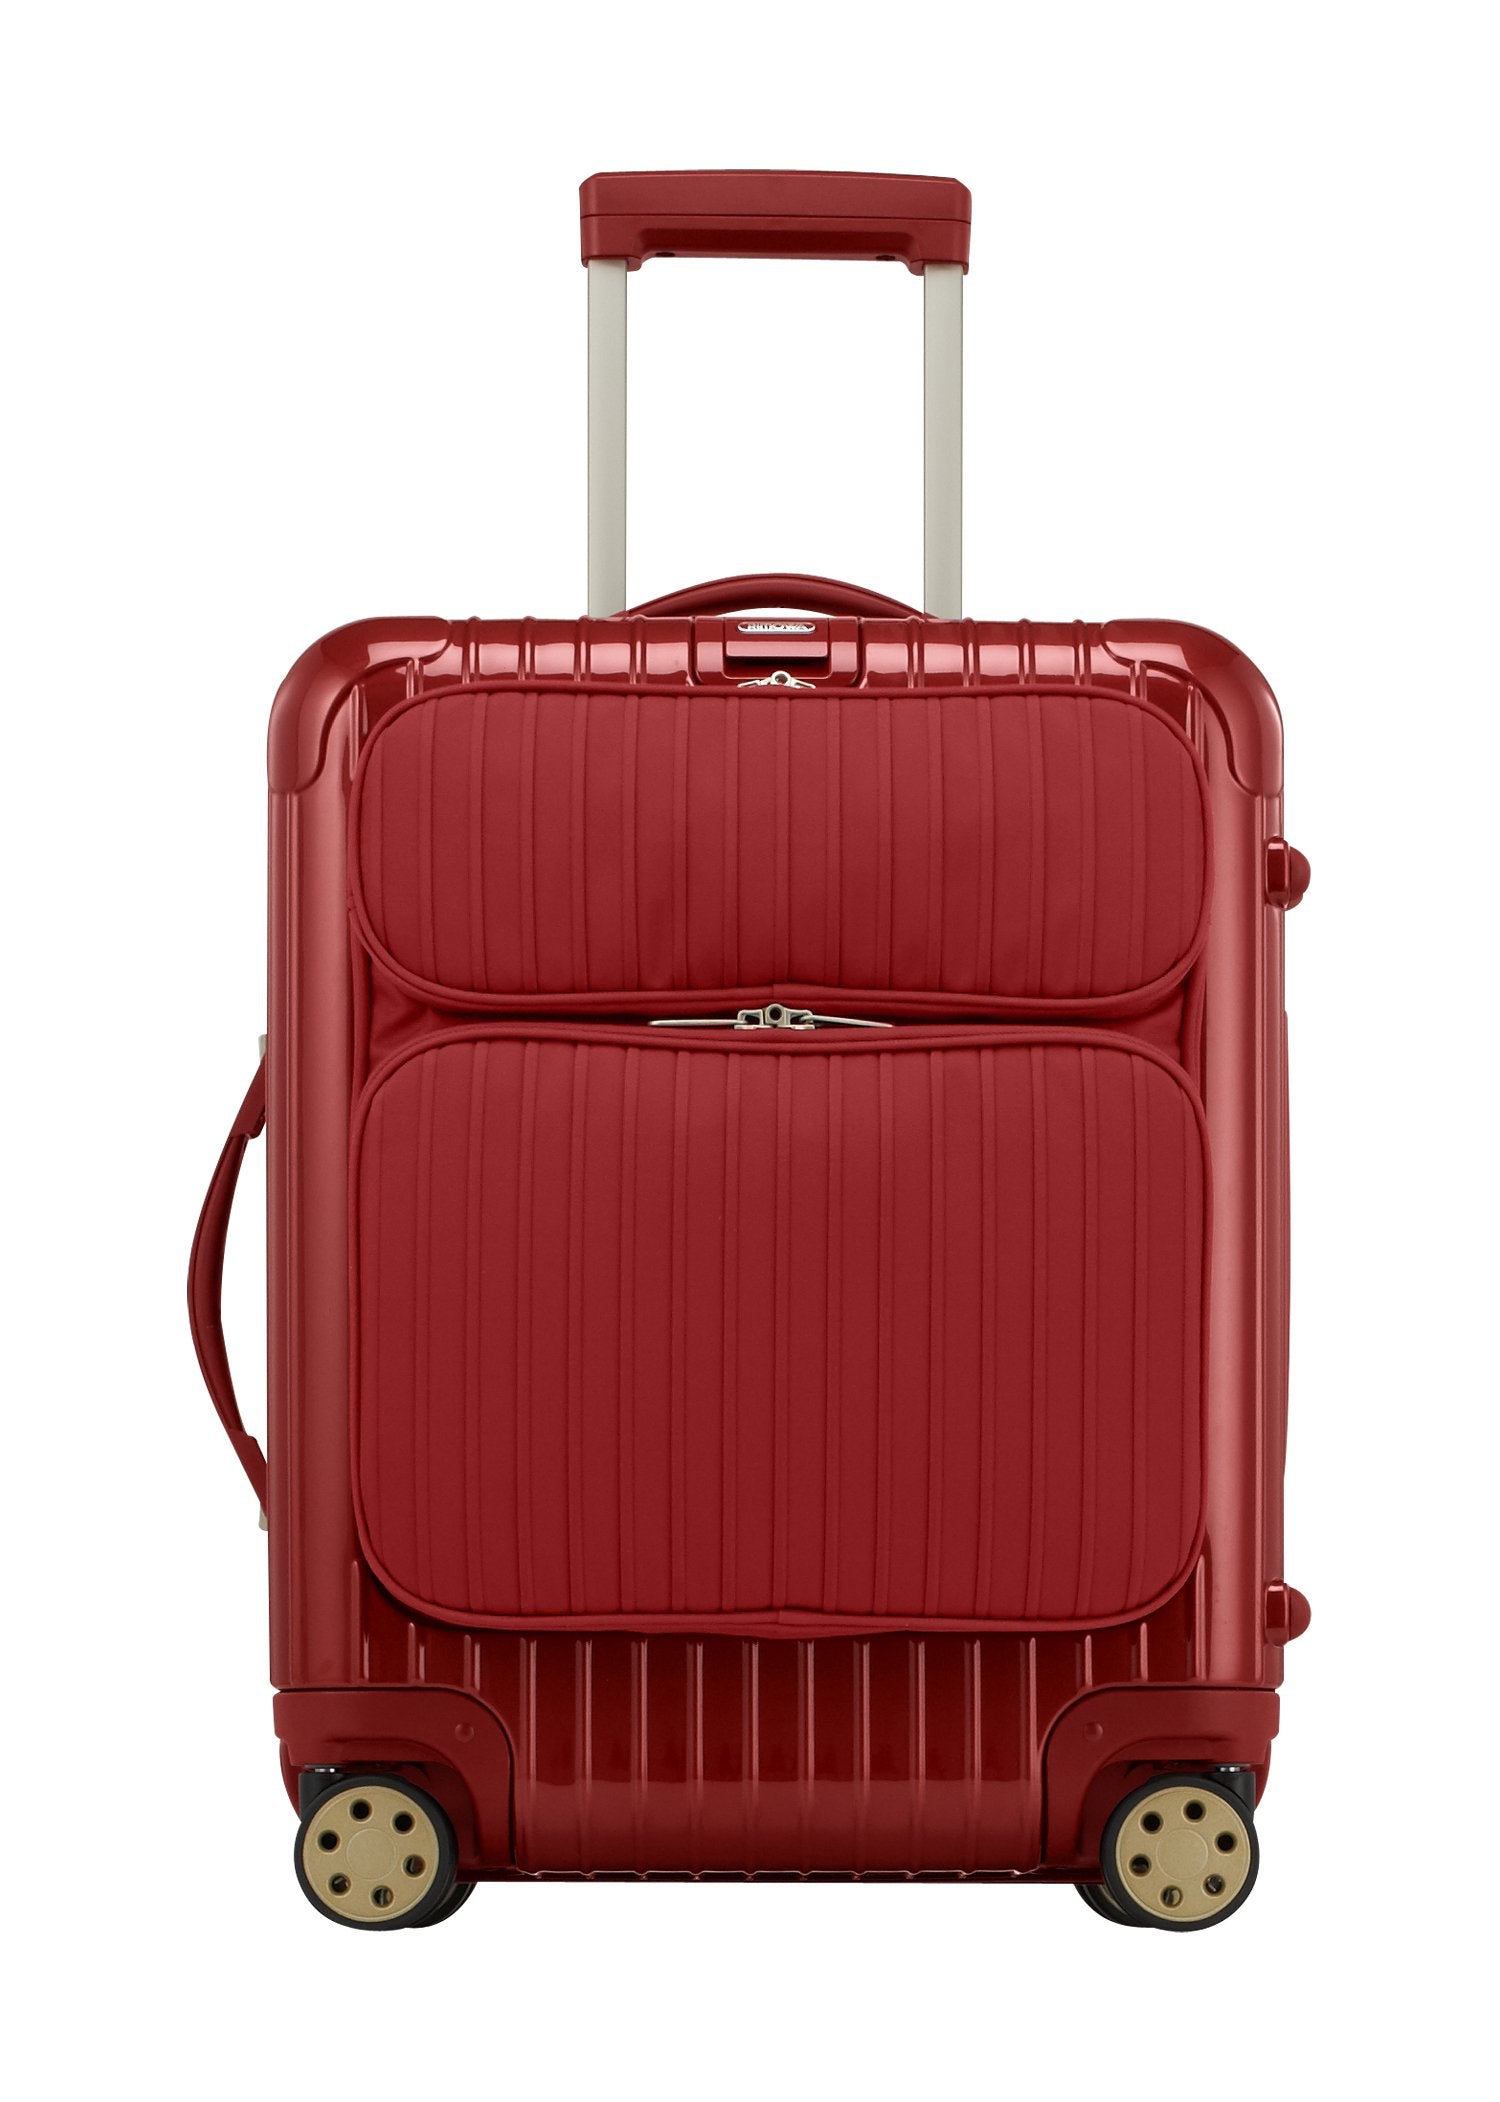 RIMOWA Carry Bag 83070 Salsa Deluxe 4 wheels/Polycarbonate wine-red un –